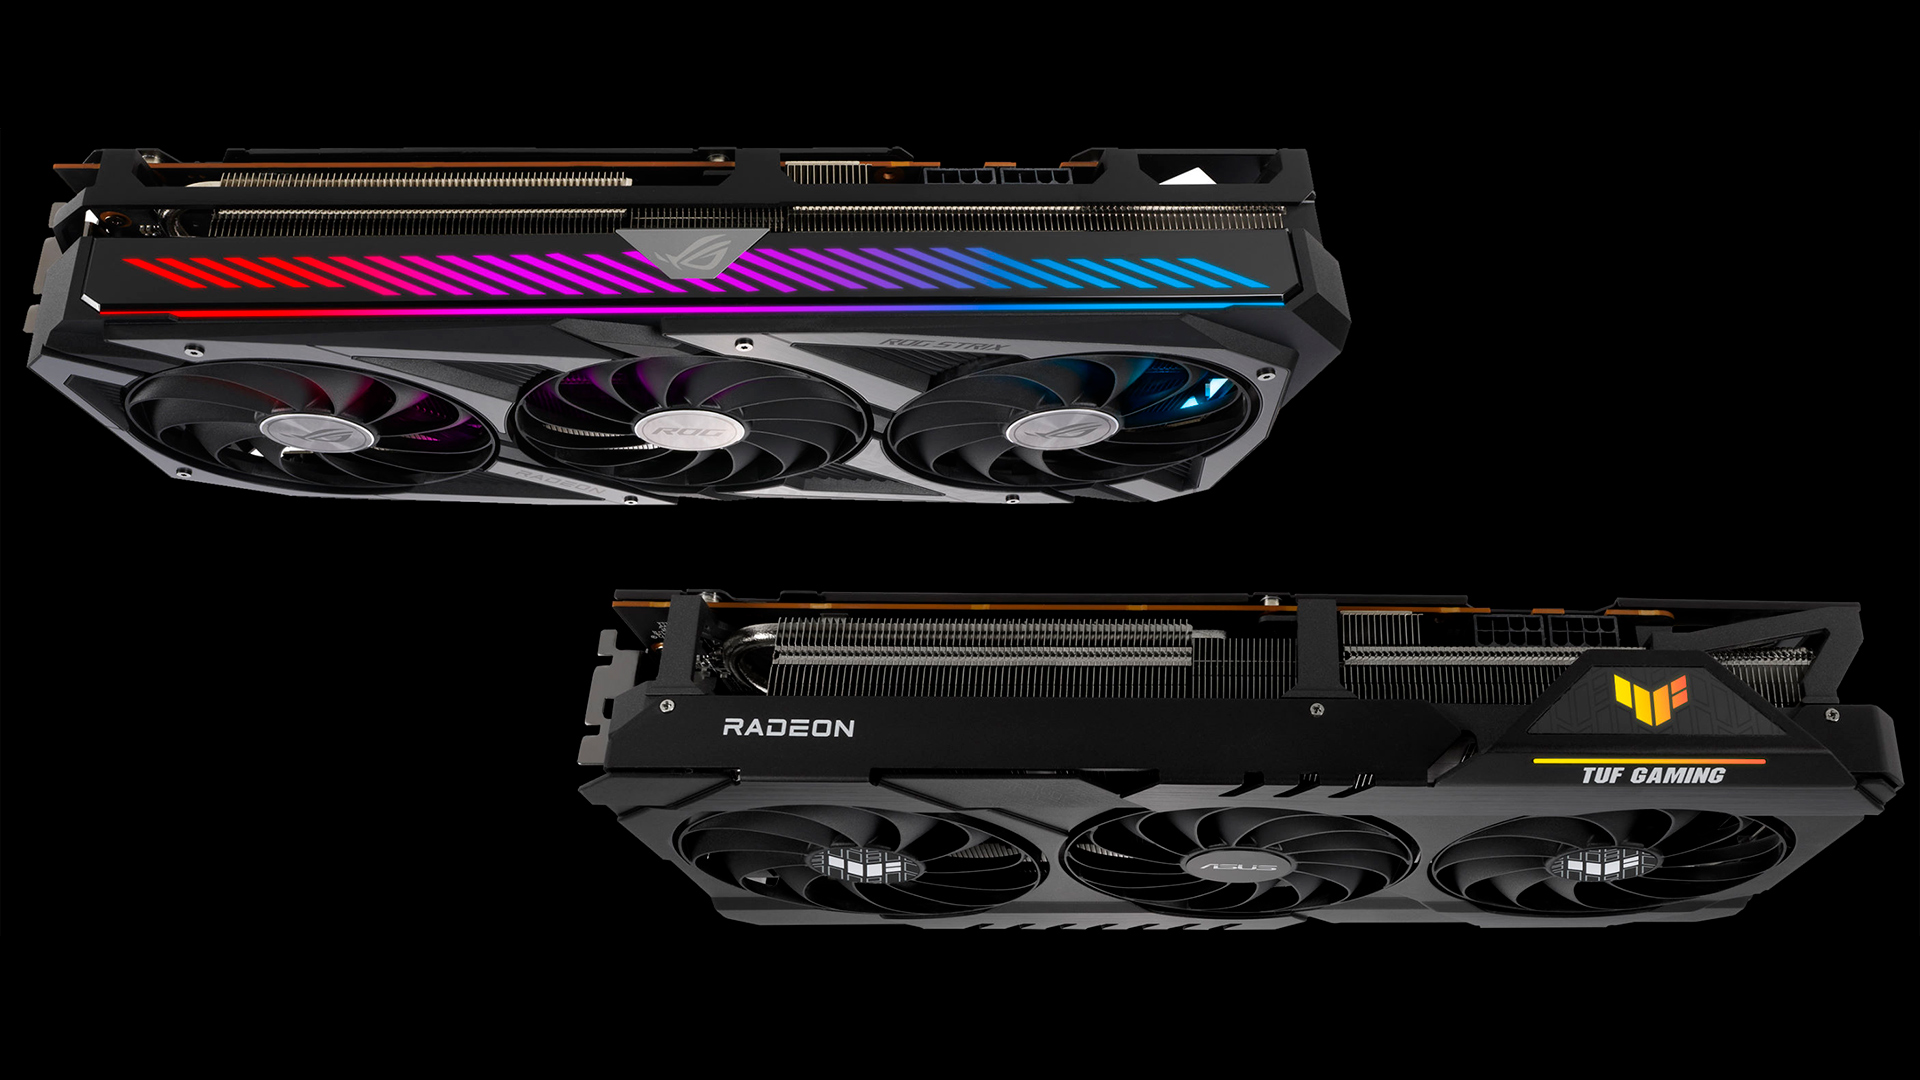 asus-launches-‘beastly-styled’-custom-radeon-rx-6700-xt